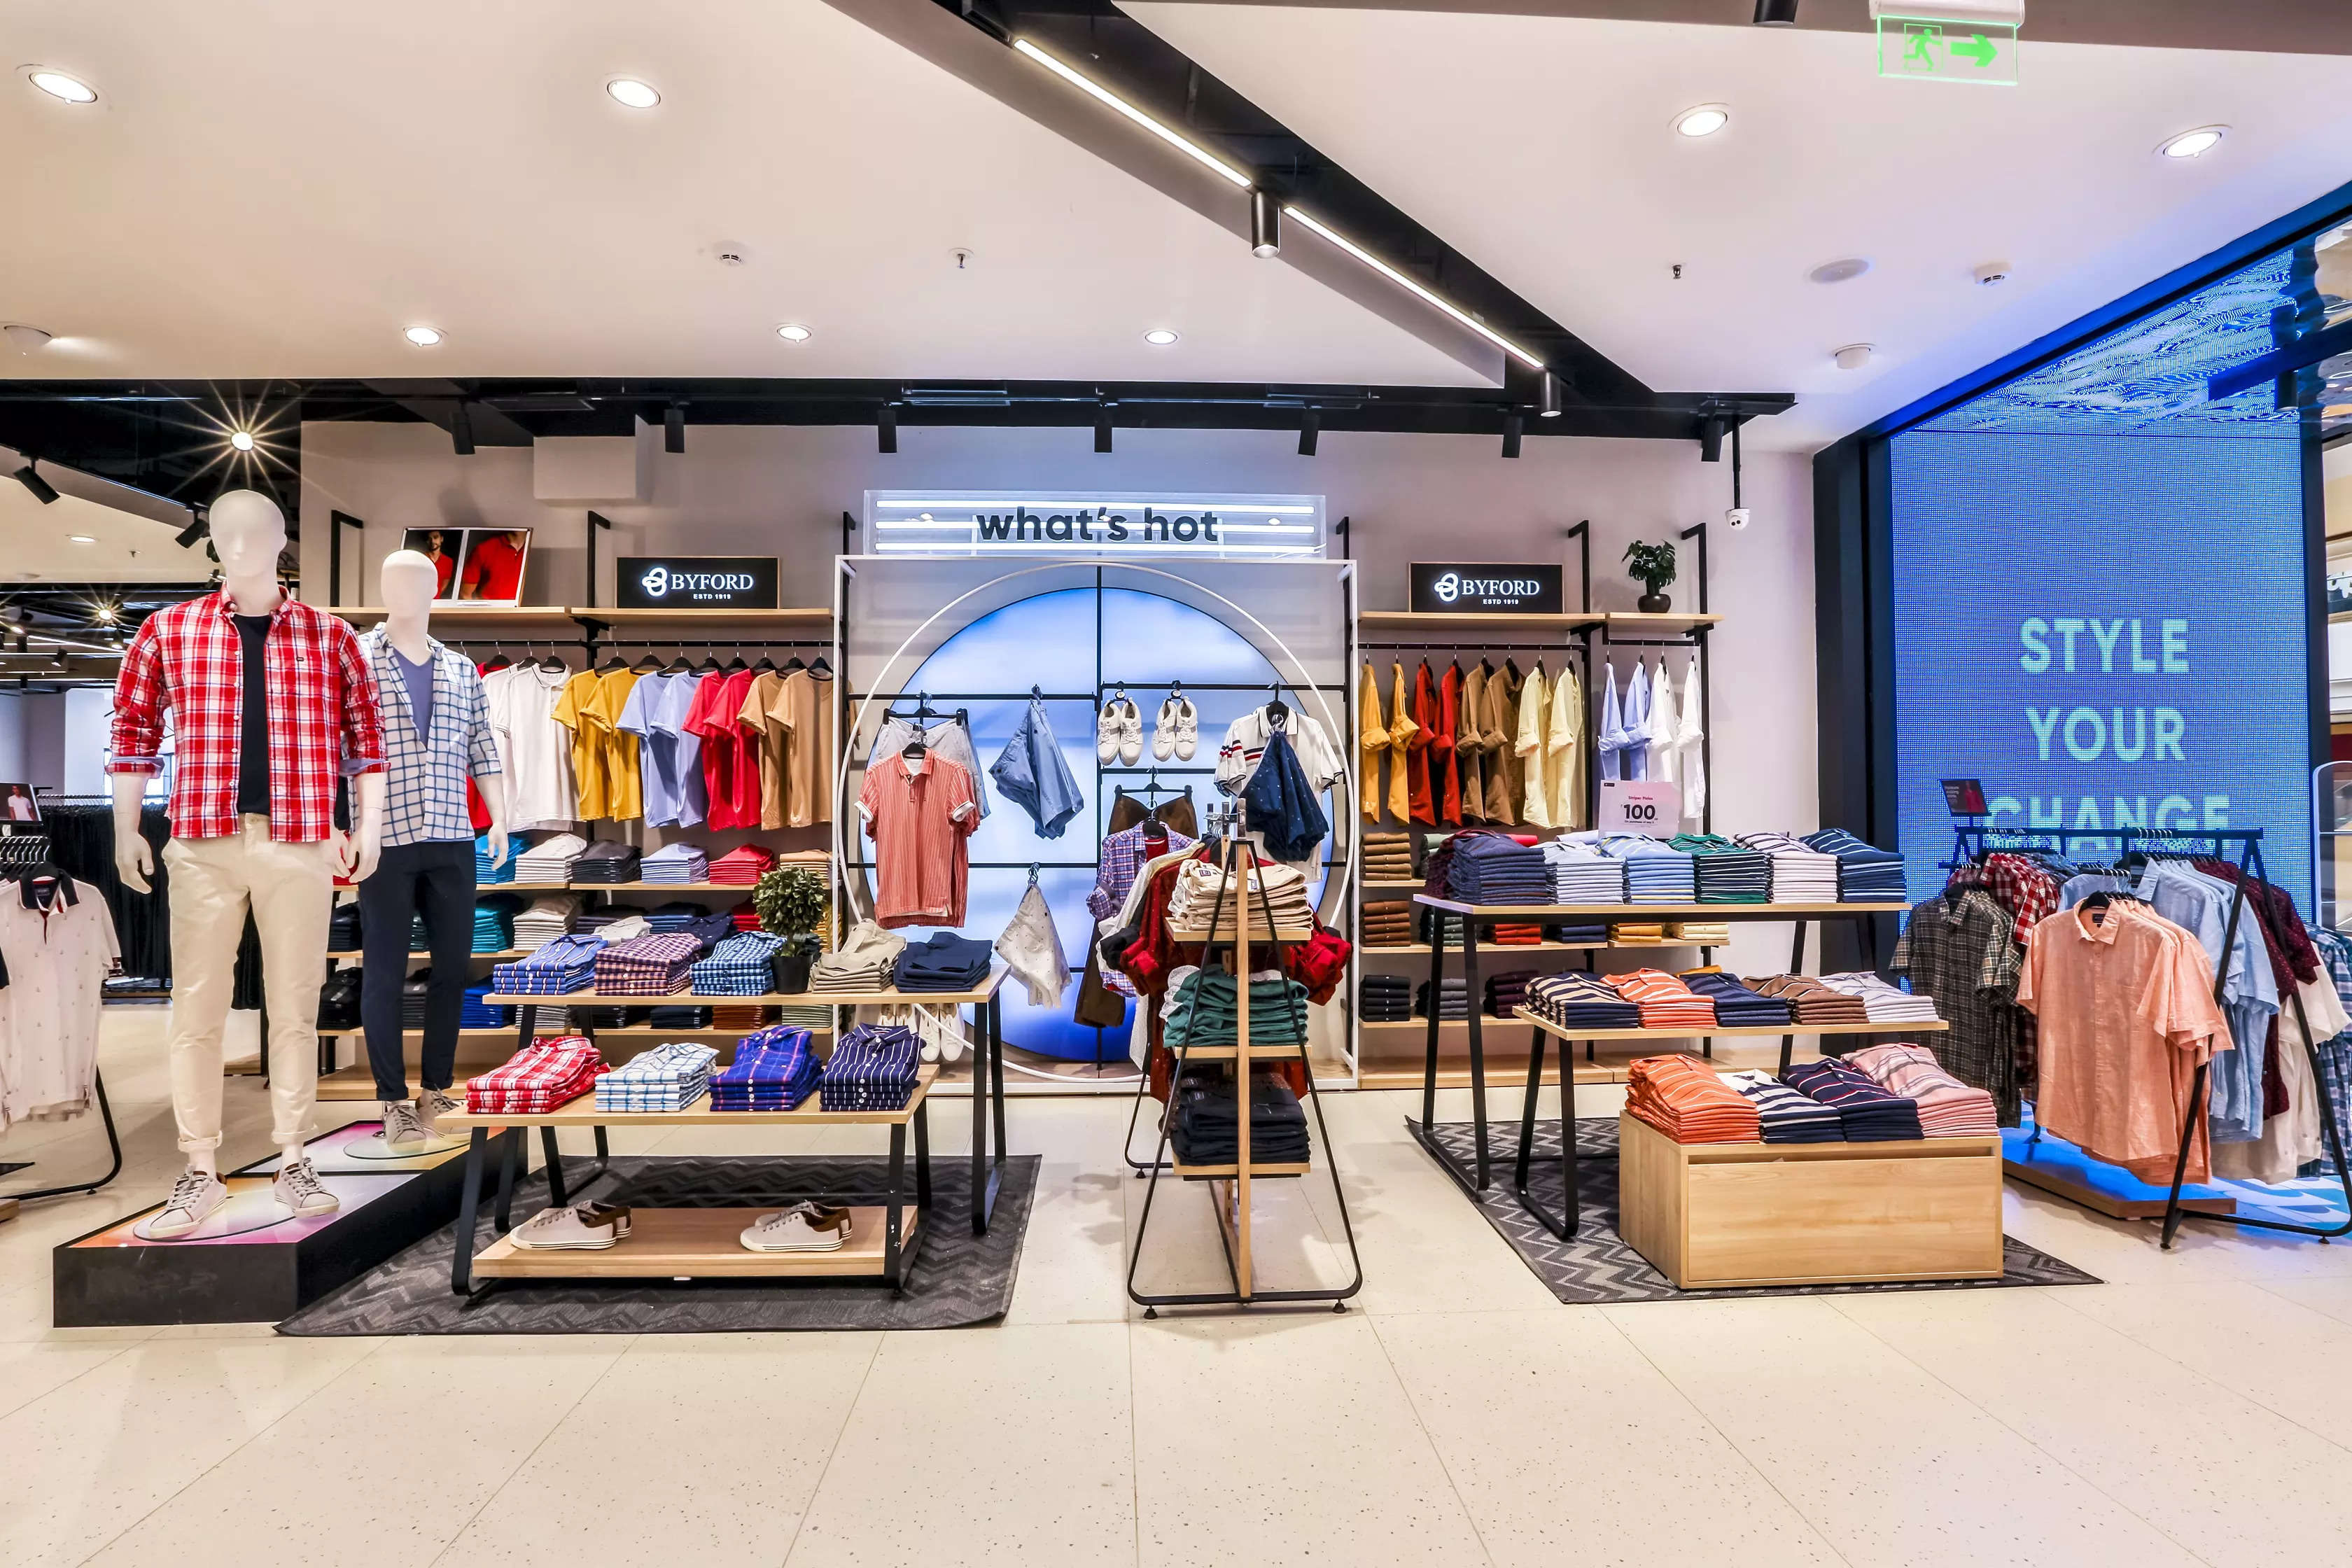 Shoppers Stop collaborates with Accenture for digital commerce